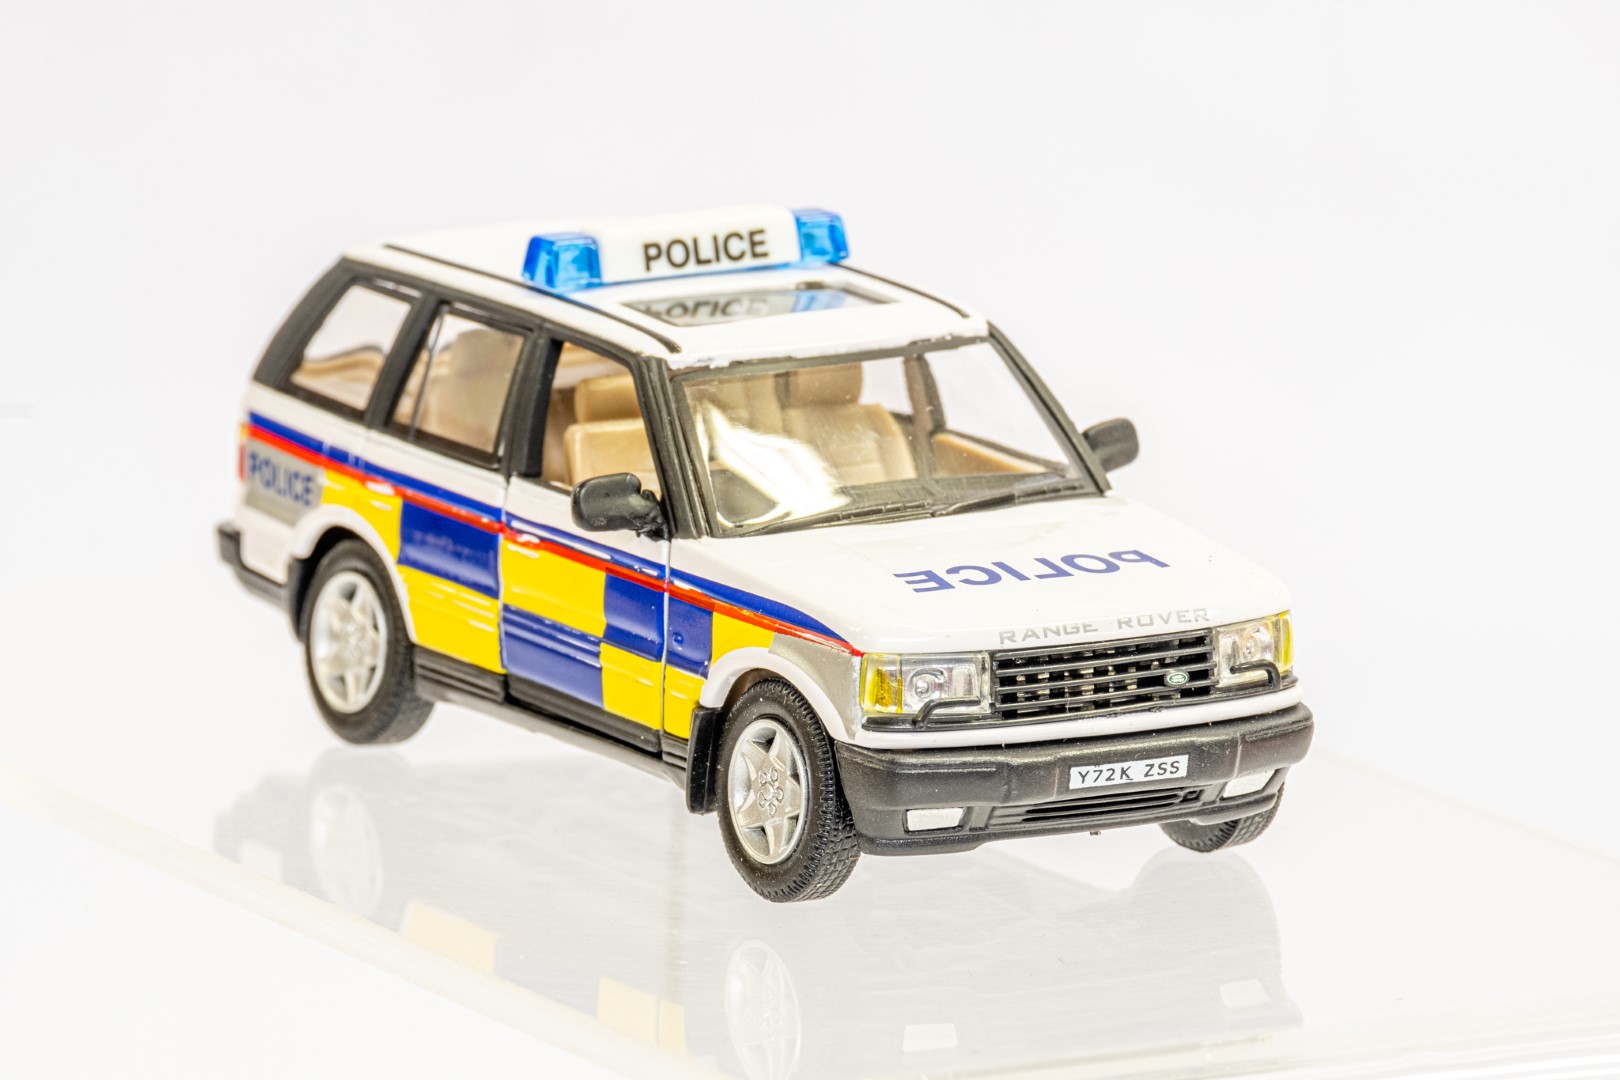 Automax Range Rover 4.8 HSE - Police - Image 7 of 7